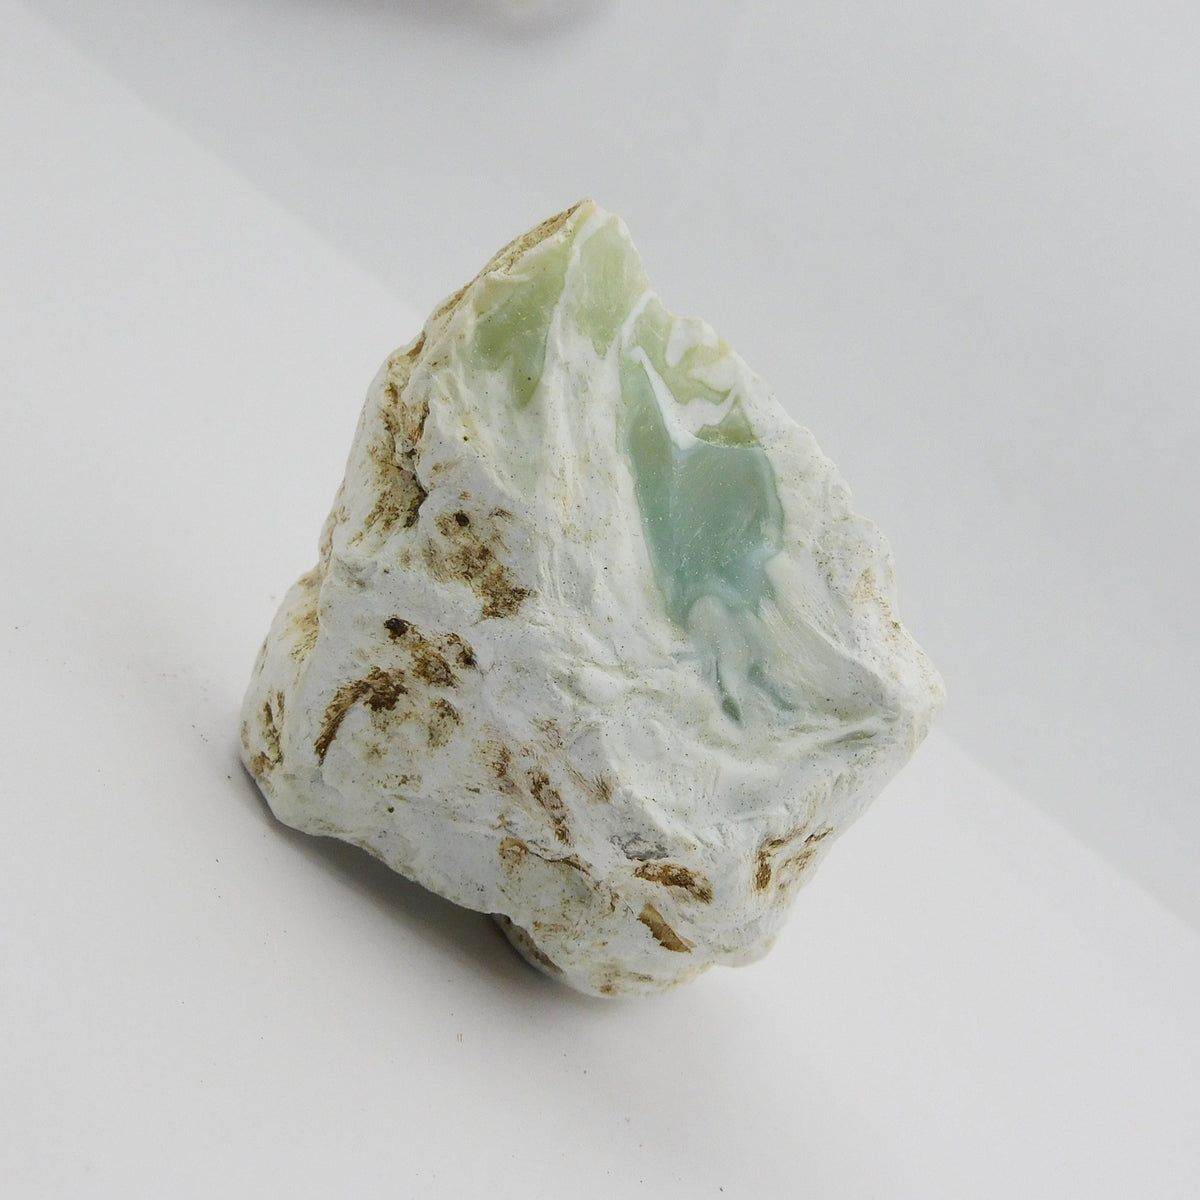 222.40 Carat Huge Size Natural White Color Opal Rough Certified Loose Gemstone Rough Opal Gemstone Rough, Healing Chakra Balance, Designer AAA Quality White Opal Rough, Pendant Jewelry Making Raw Opal Crystal Minerals